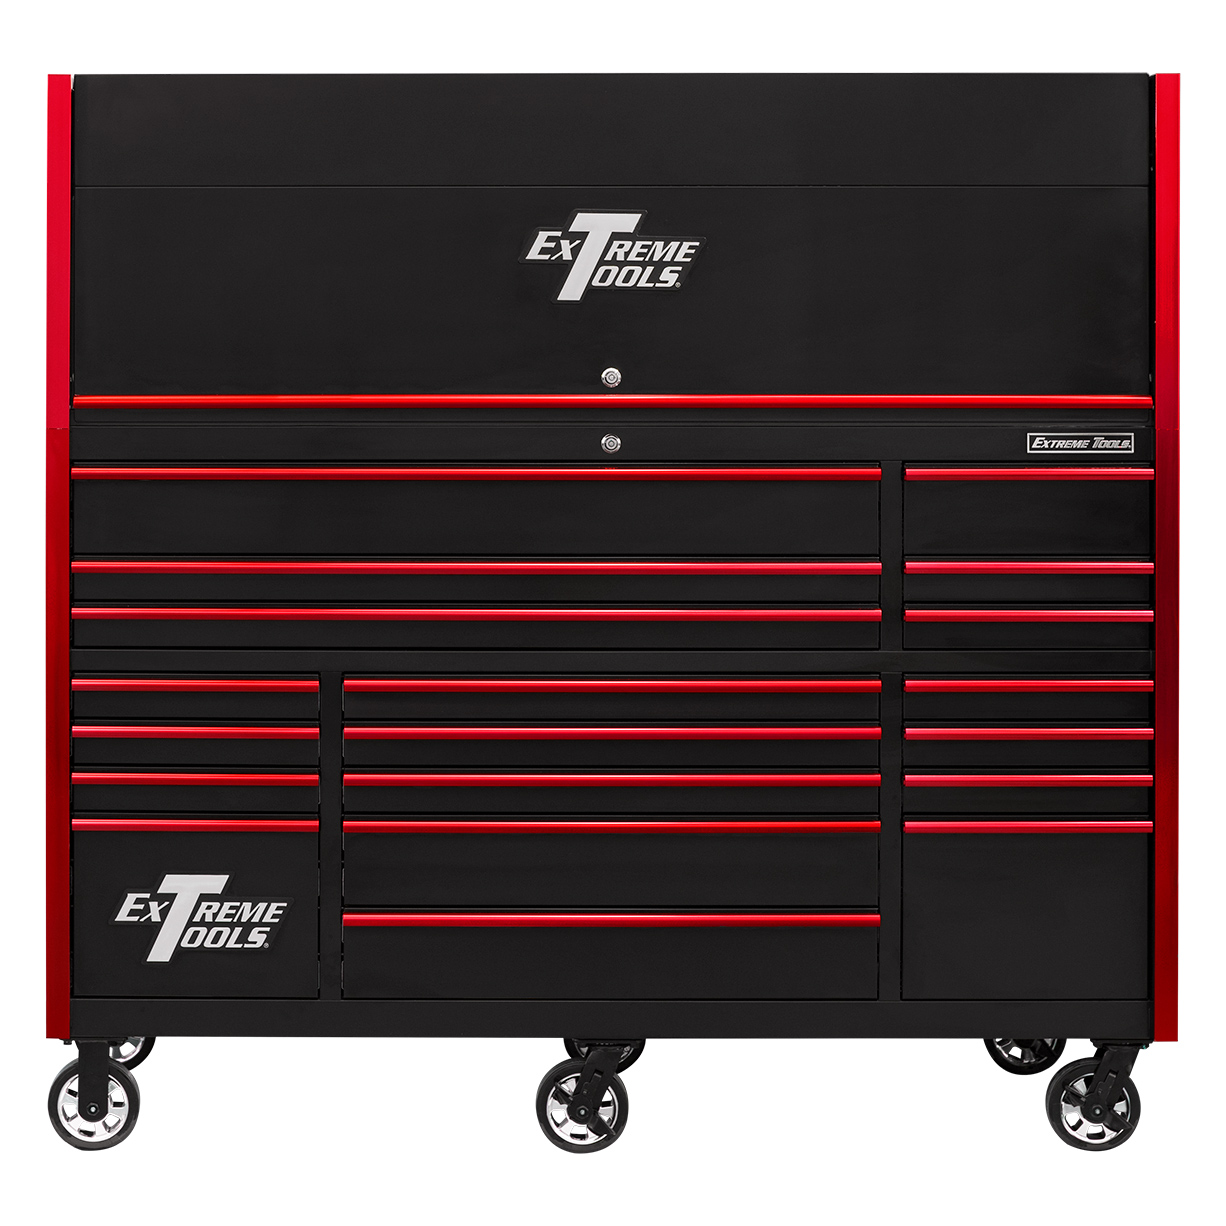 Extreme Tools Combo: 72 Triple Bank Roller Cabinet, Top Hutch - RTB